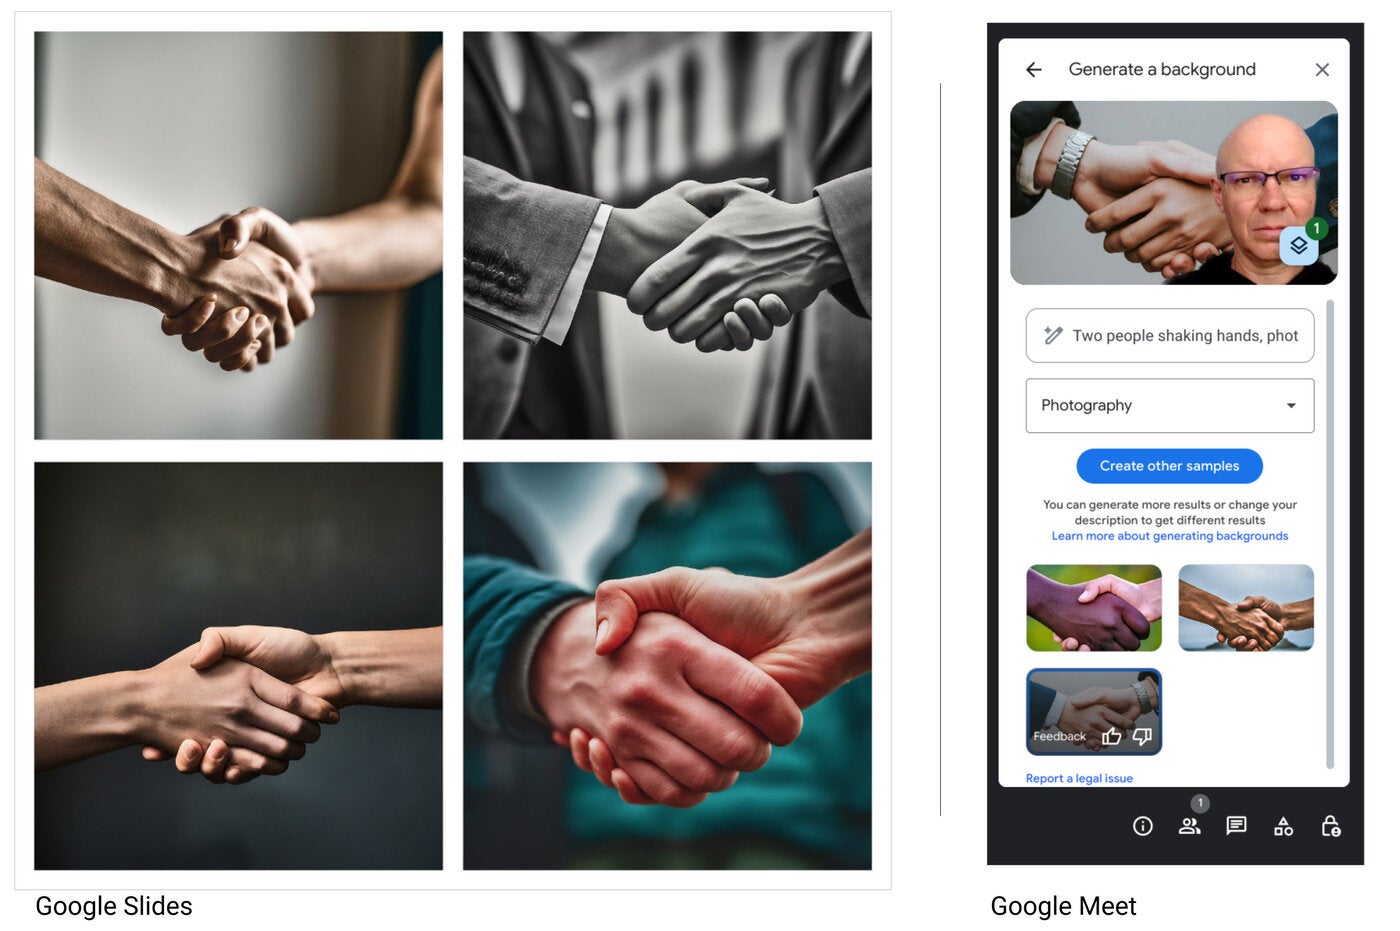 Handshake images generated by Gemini in Google Slides (left) and Google Meet (right).